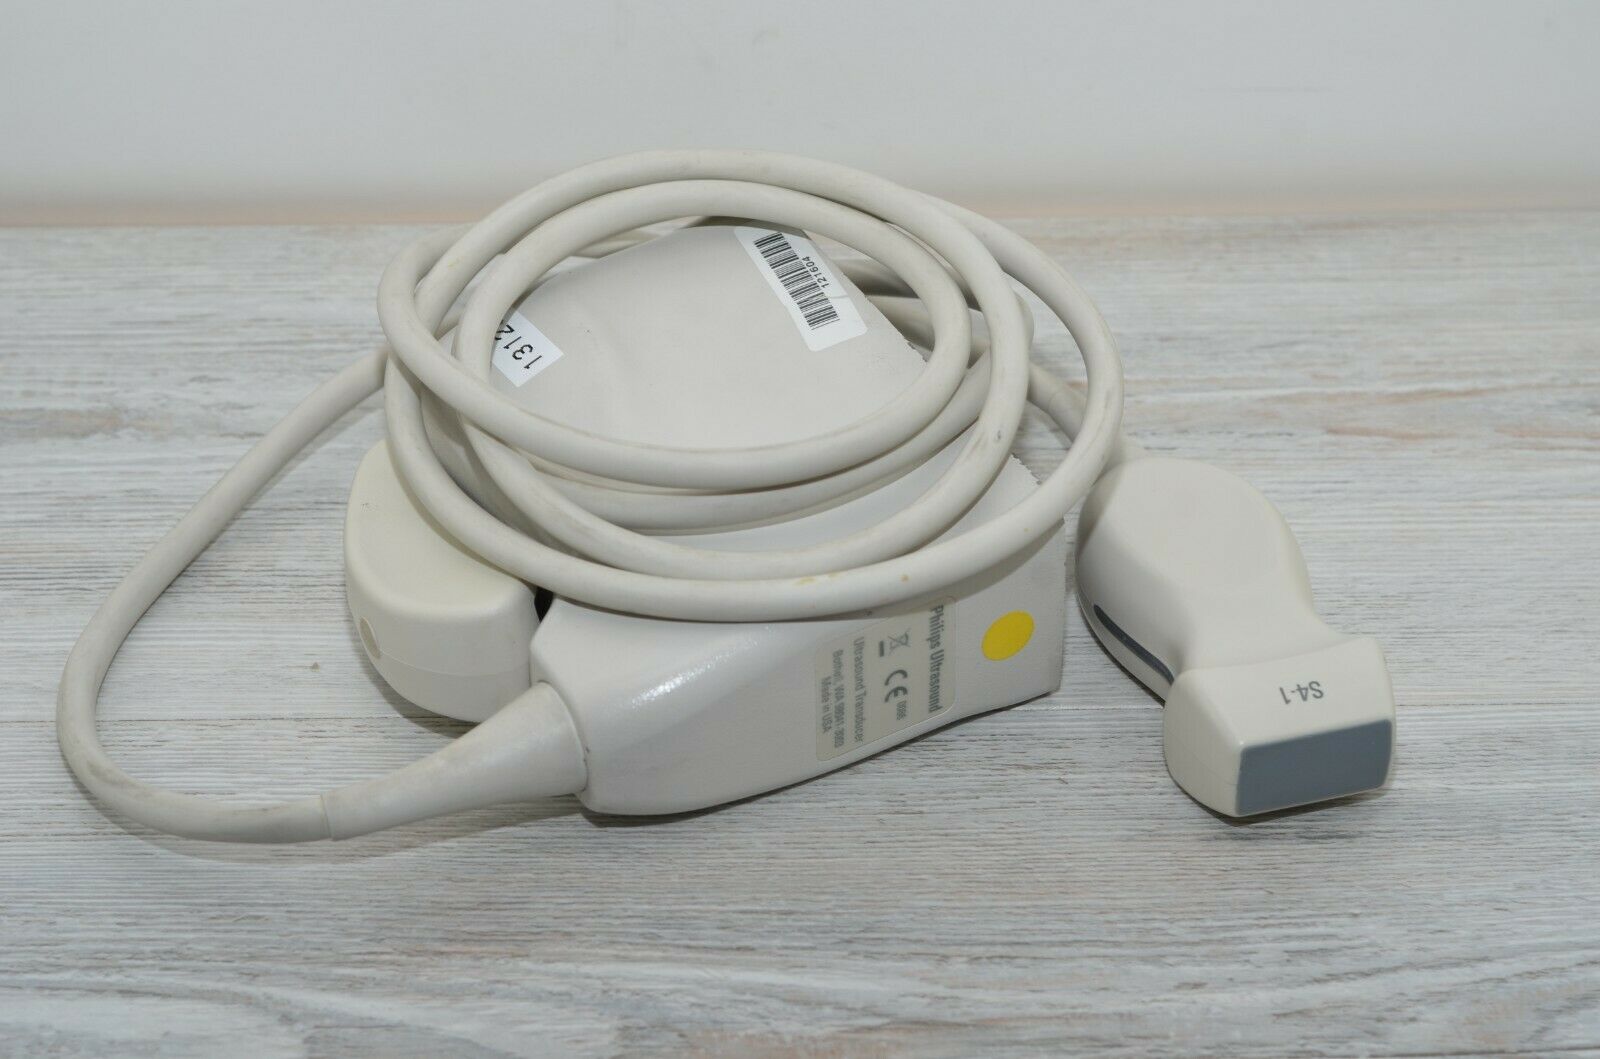 Philips Healthcare S4-1 Cardiac Ultrasound Transducer Probe DIAGNOSTIC ULTRASOUND MACHINES FOR SALE